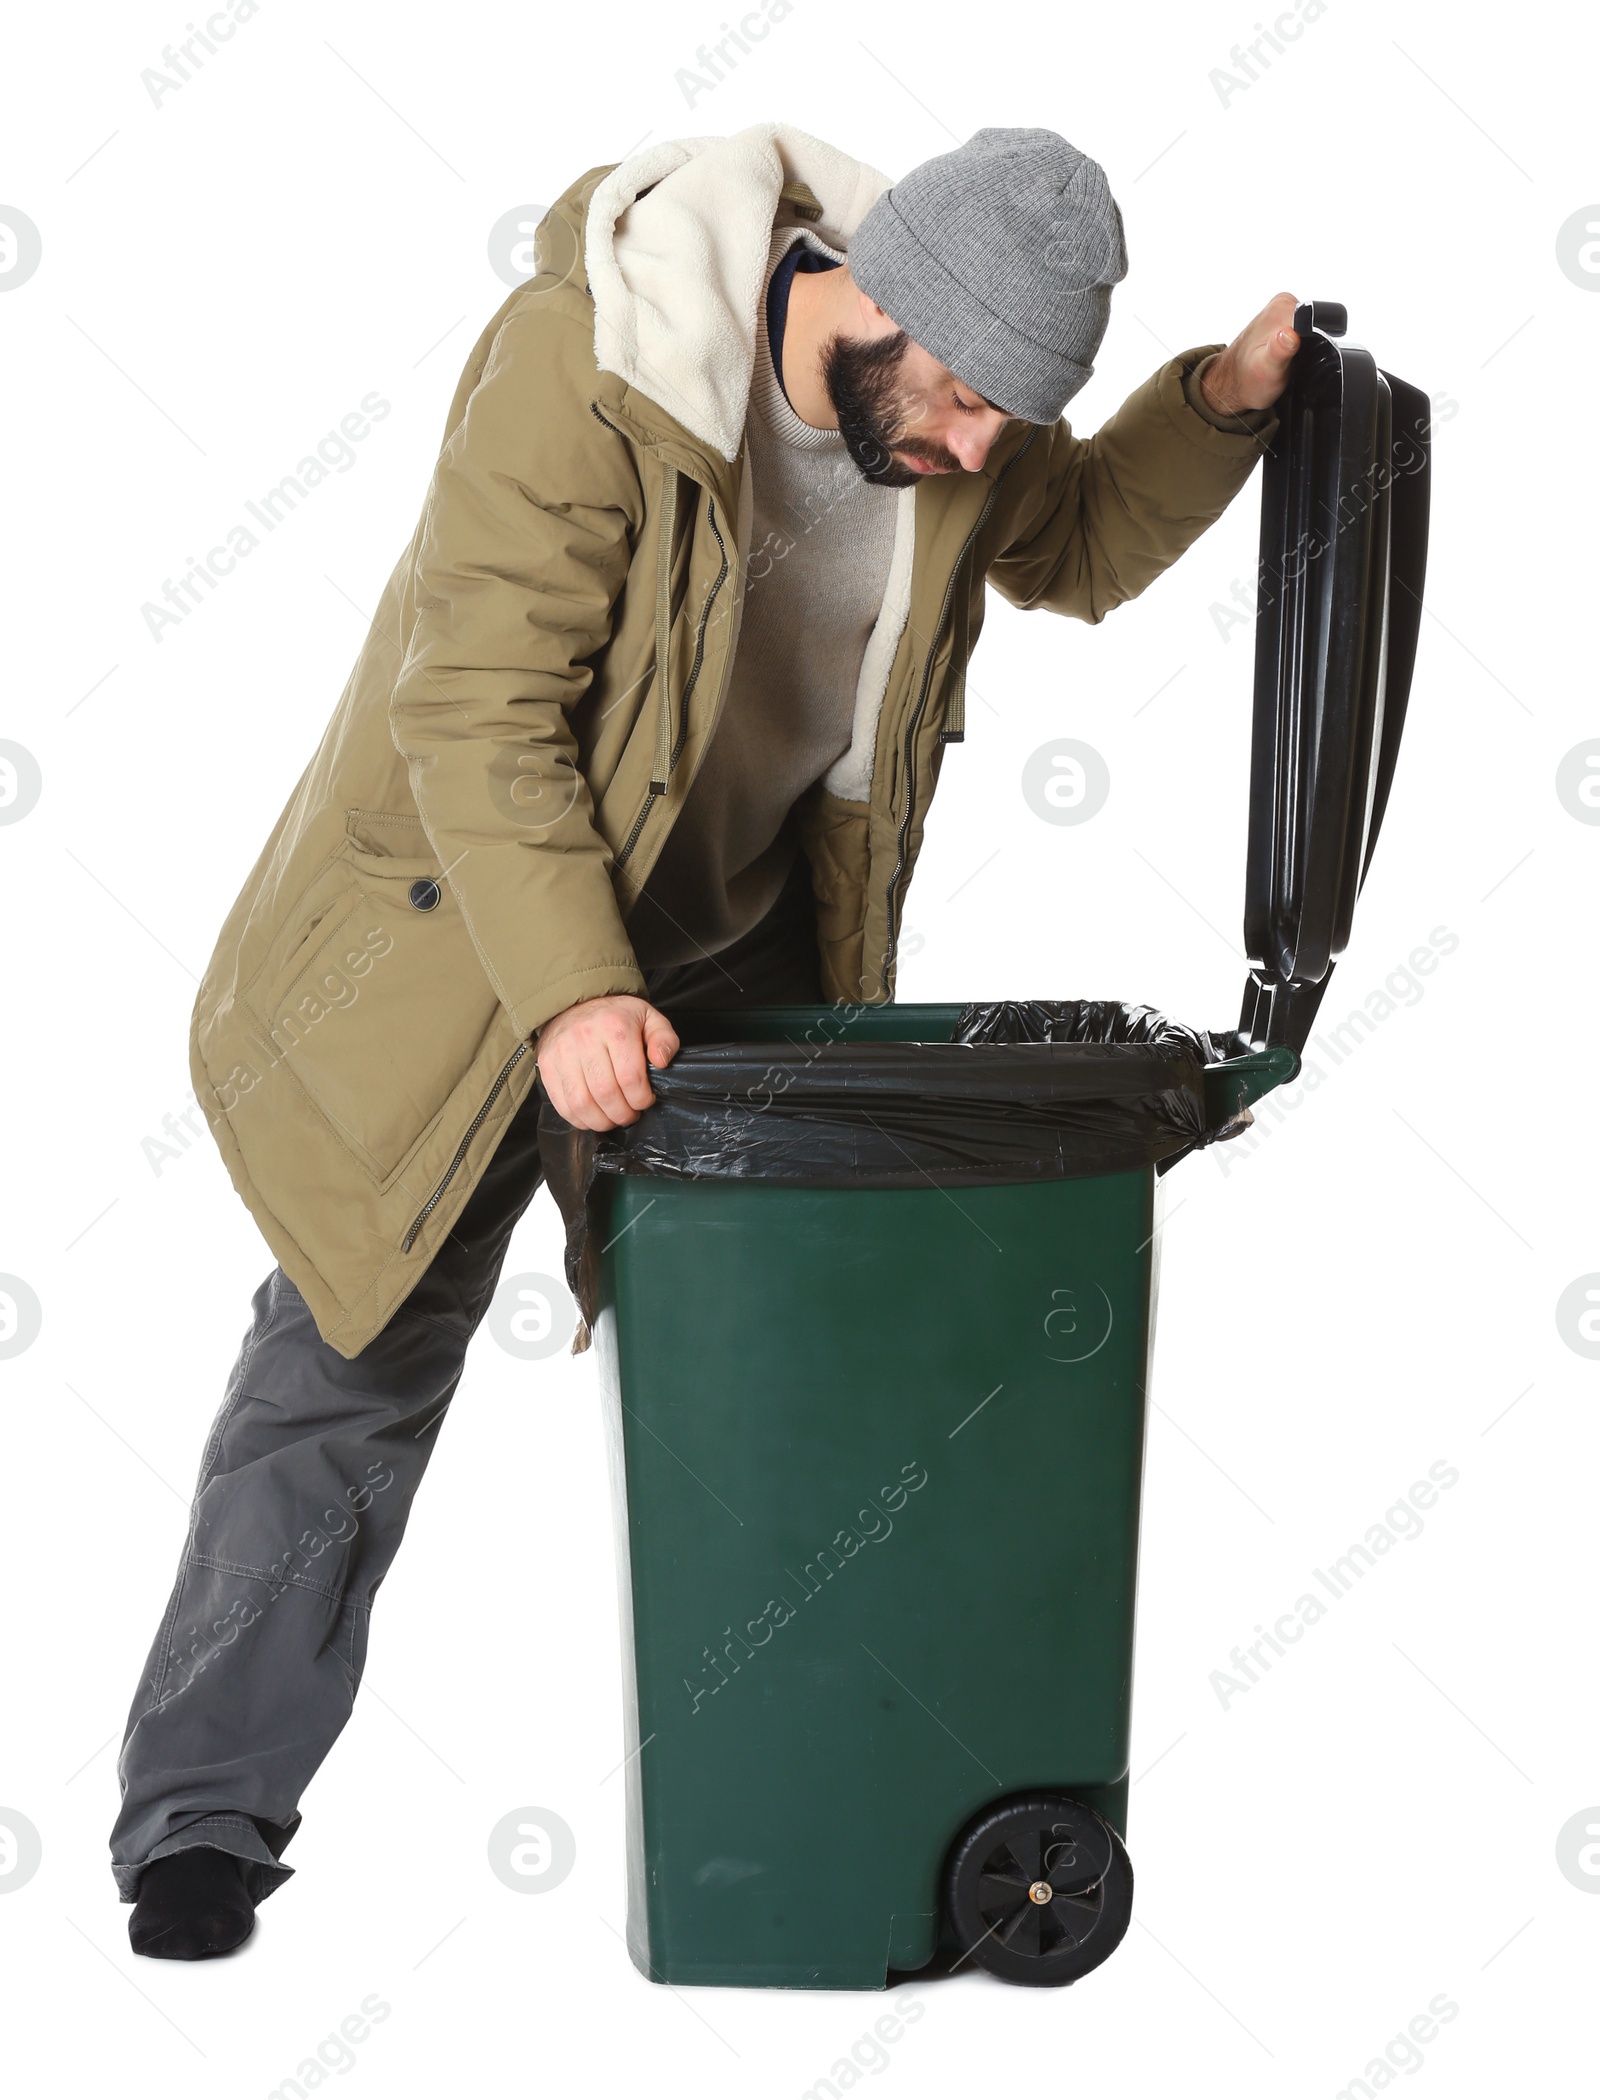 Photo of Poor homeless man digging in trash bin isolated on white